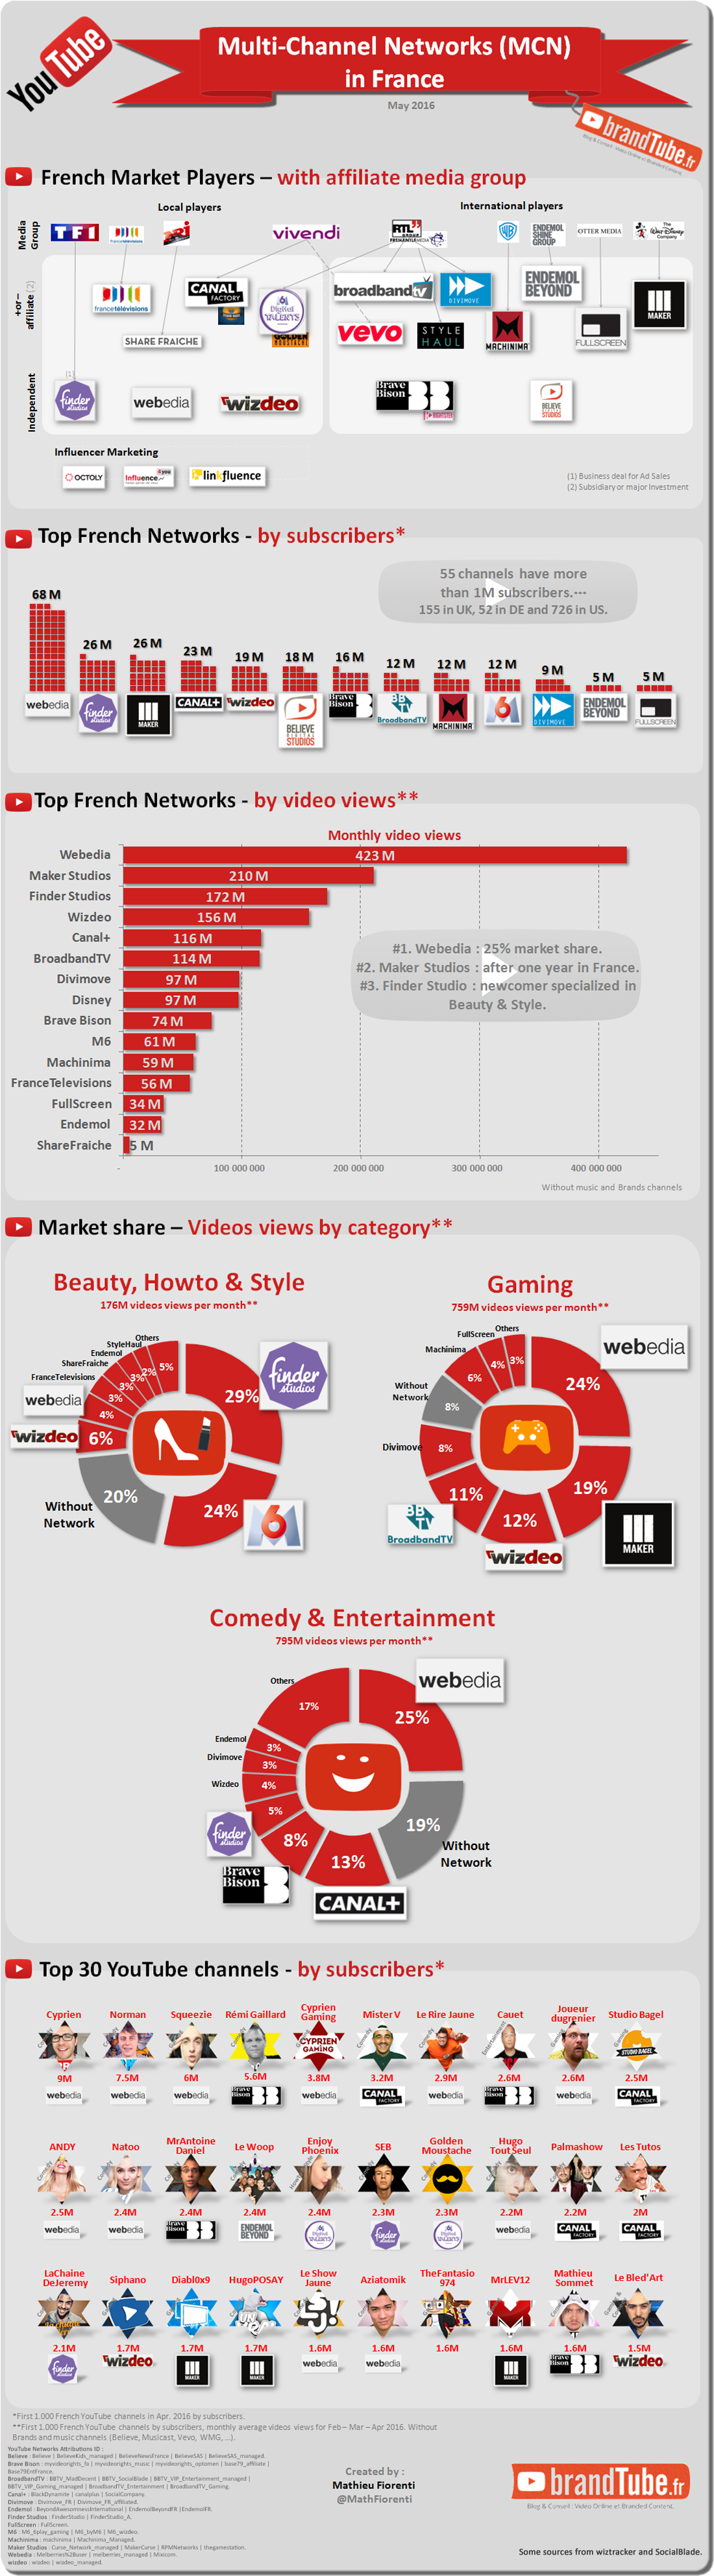 French Multi-Channel Networks (MCN) & Top French YouTubers